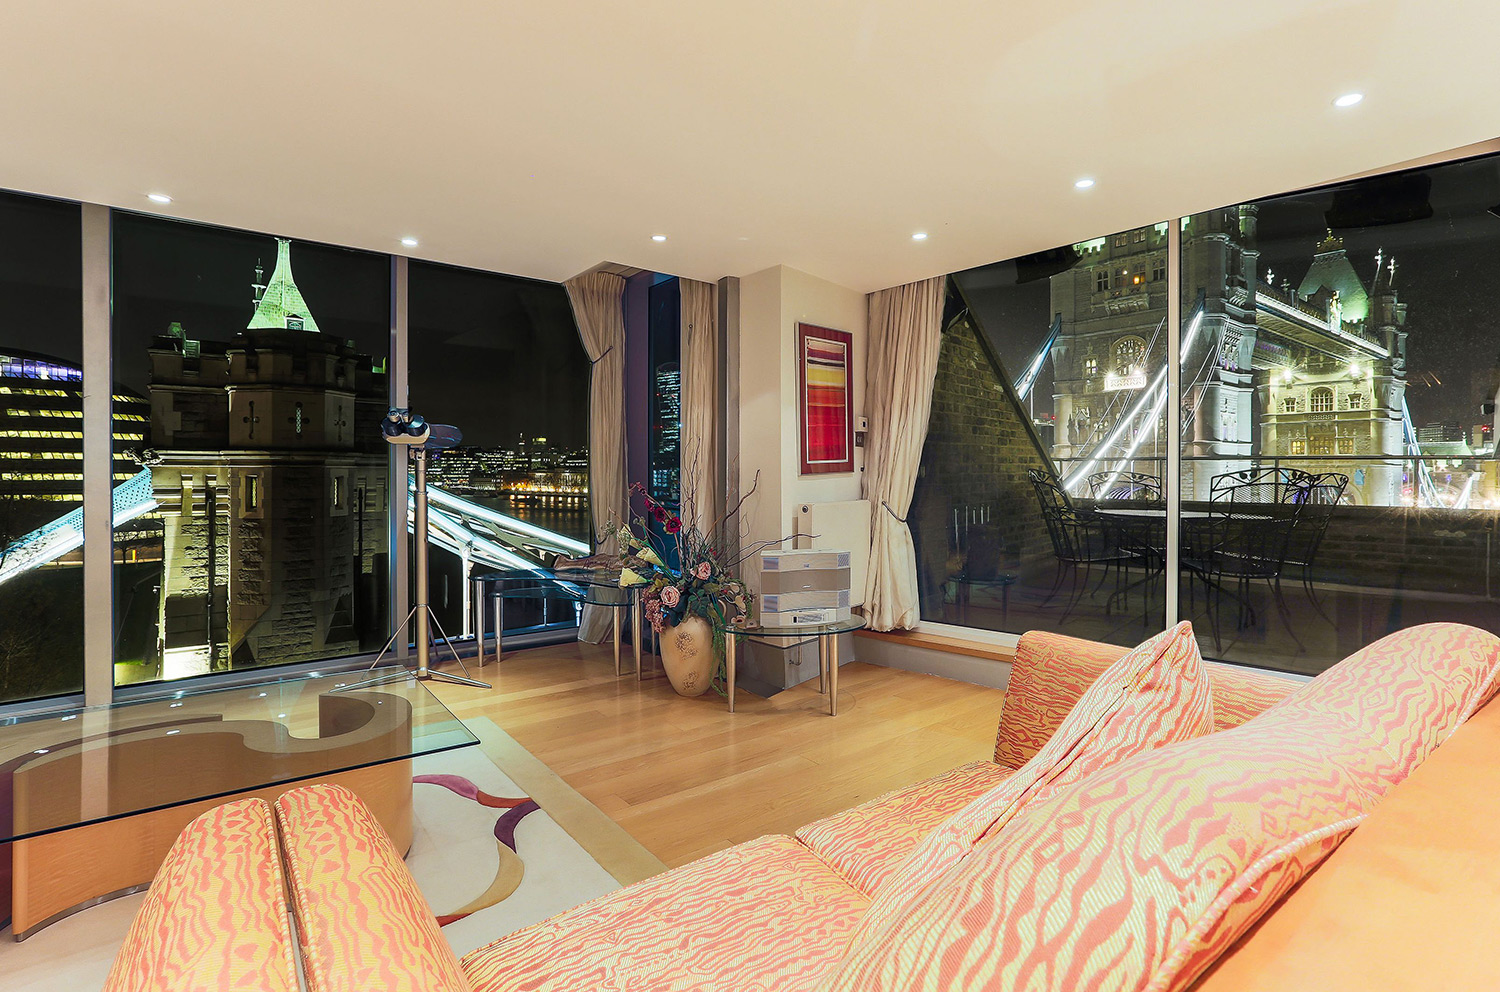 Interior views of The High Command penthouse in London